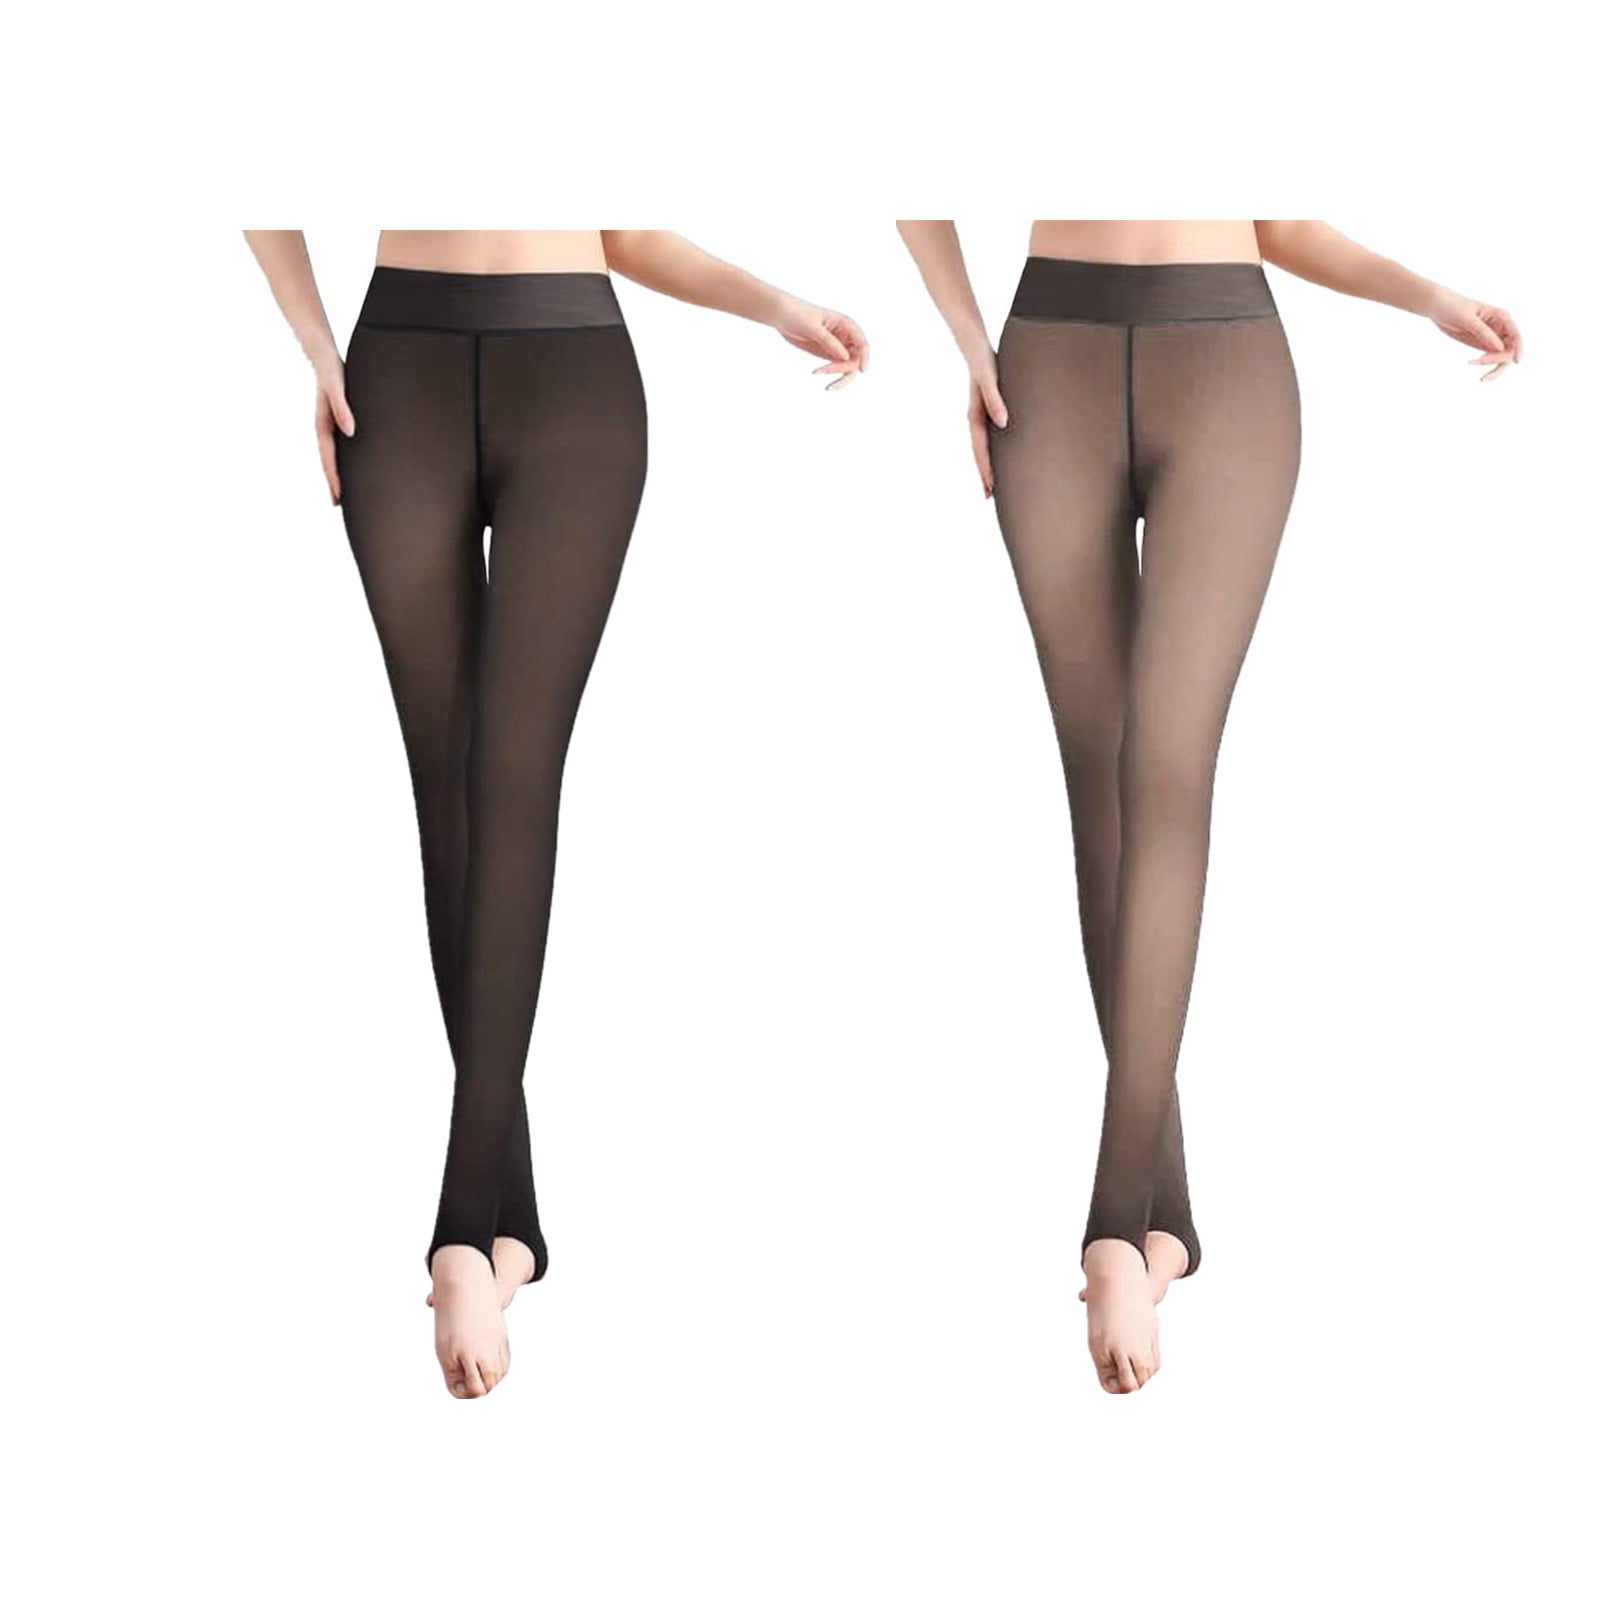 SIMYJOY Fleece Lined Tights Women, Fake Translucent Warm Tights Winter  Thermal Pantyhose Fleece Lined Leggings for Woman